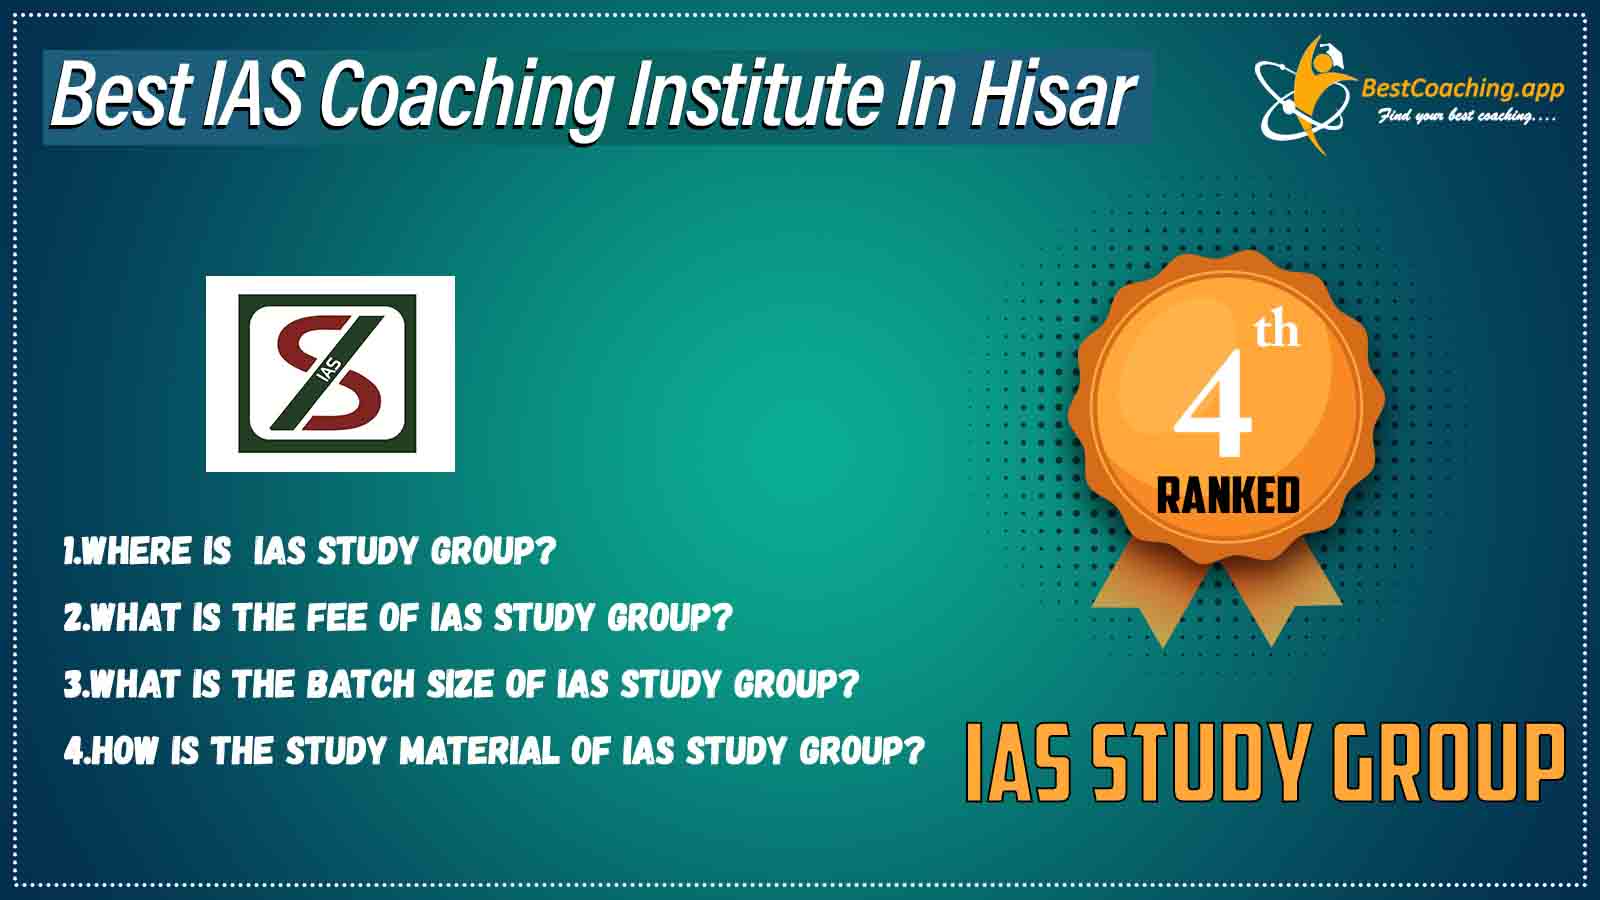 Best IAS Coaching in Hisar